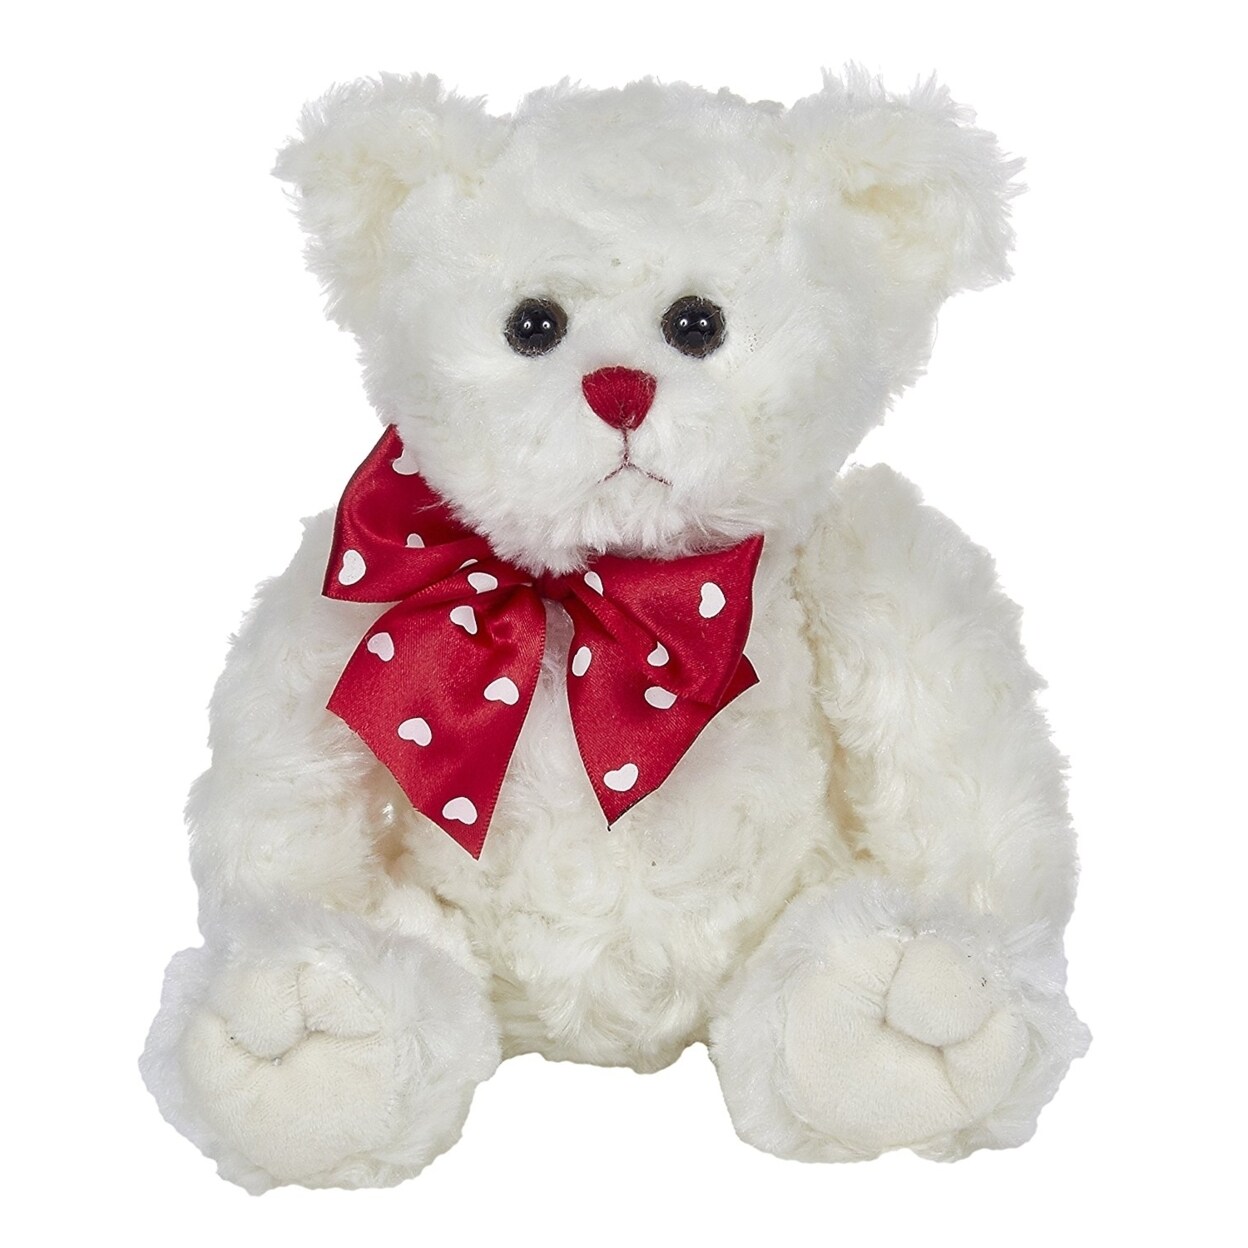 Valentines Day Gift: Stuffed PE Teddy Bear Shaped Roses Full Of Love,  Romantic Teddy Bear Doll For Girls, Cute Girlfriend And Childrens Gift From  Popit, $16.5 | DHgate.Com